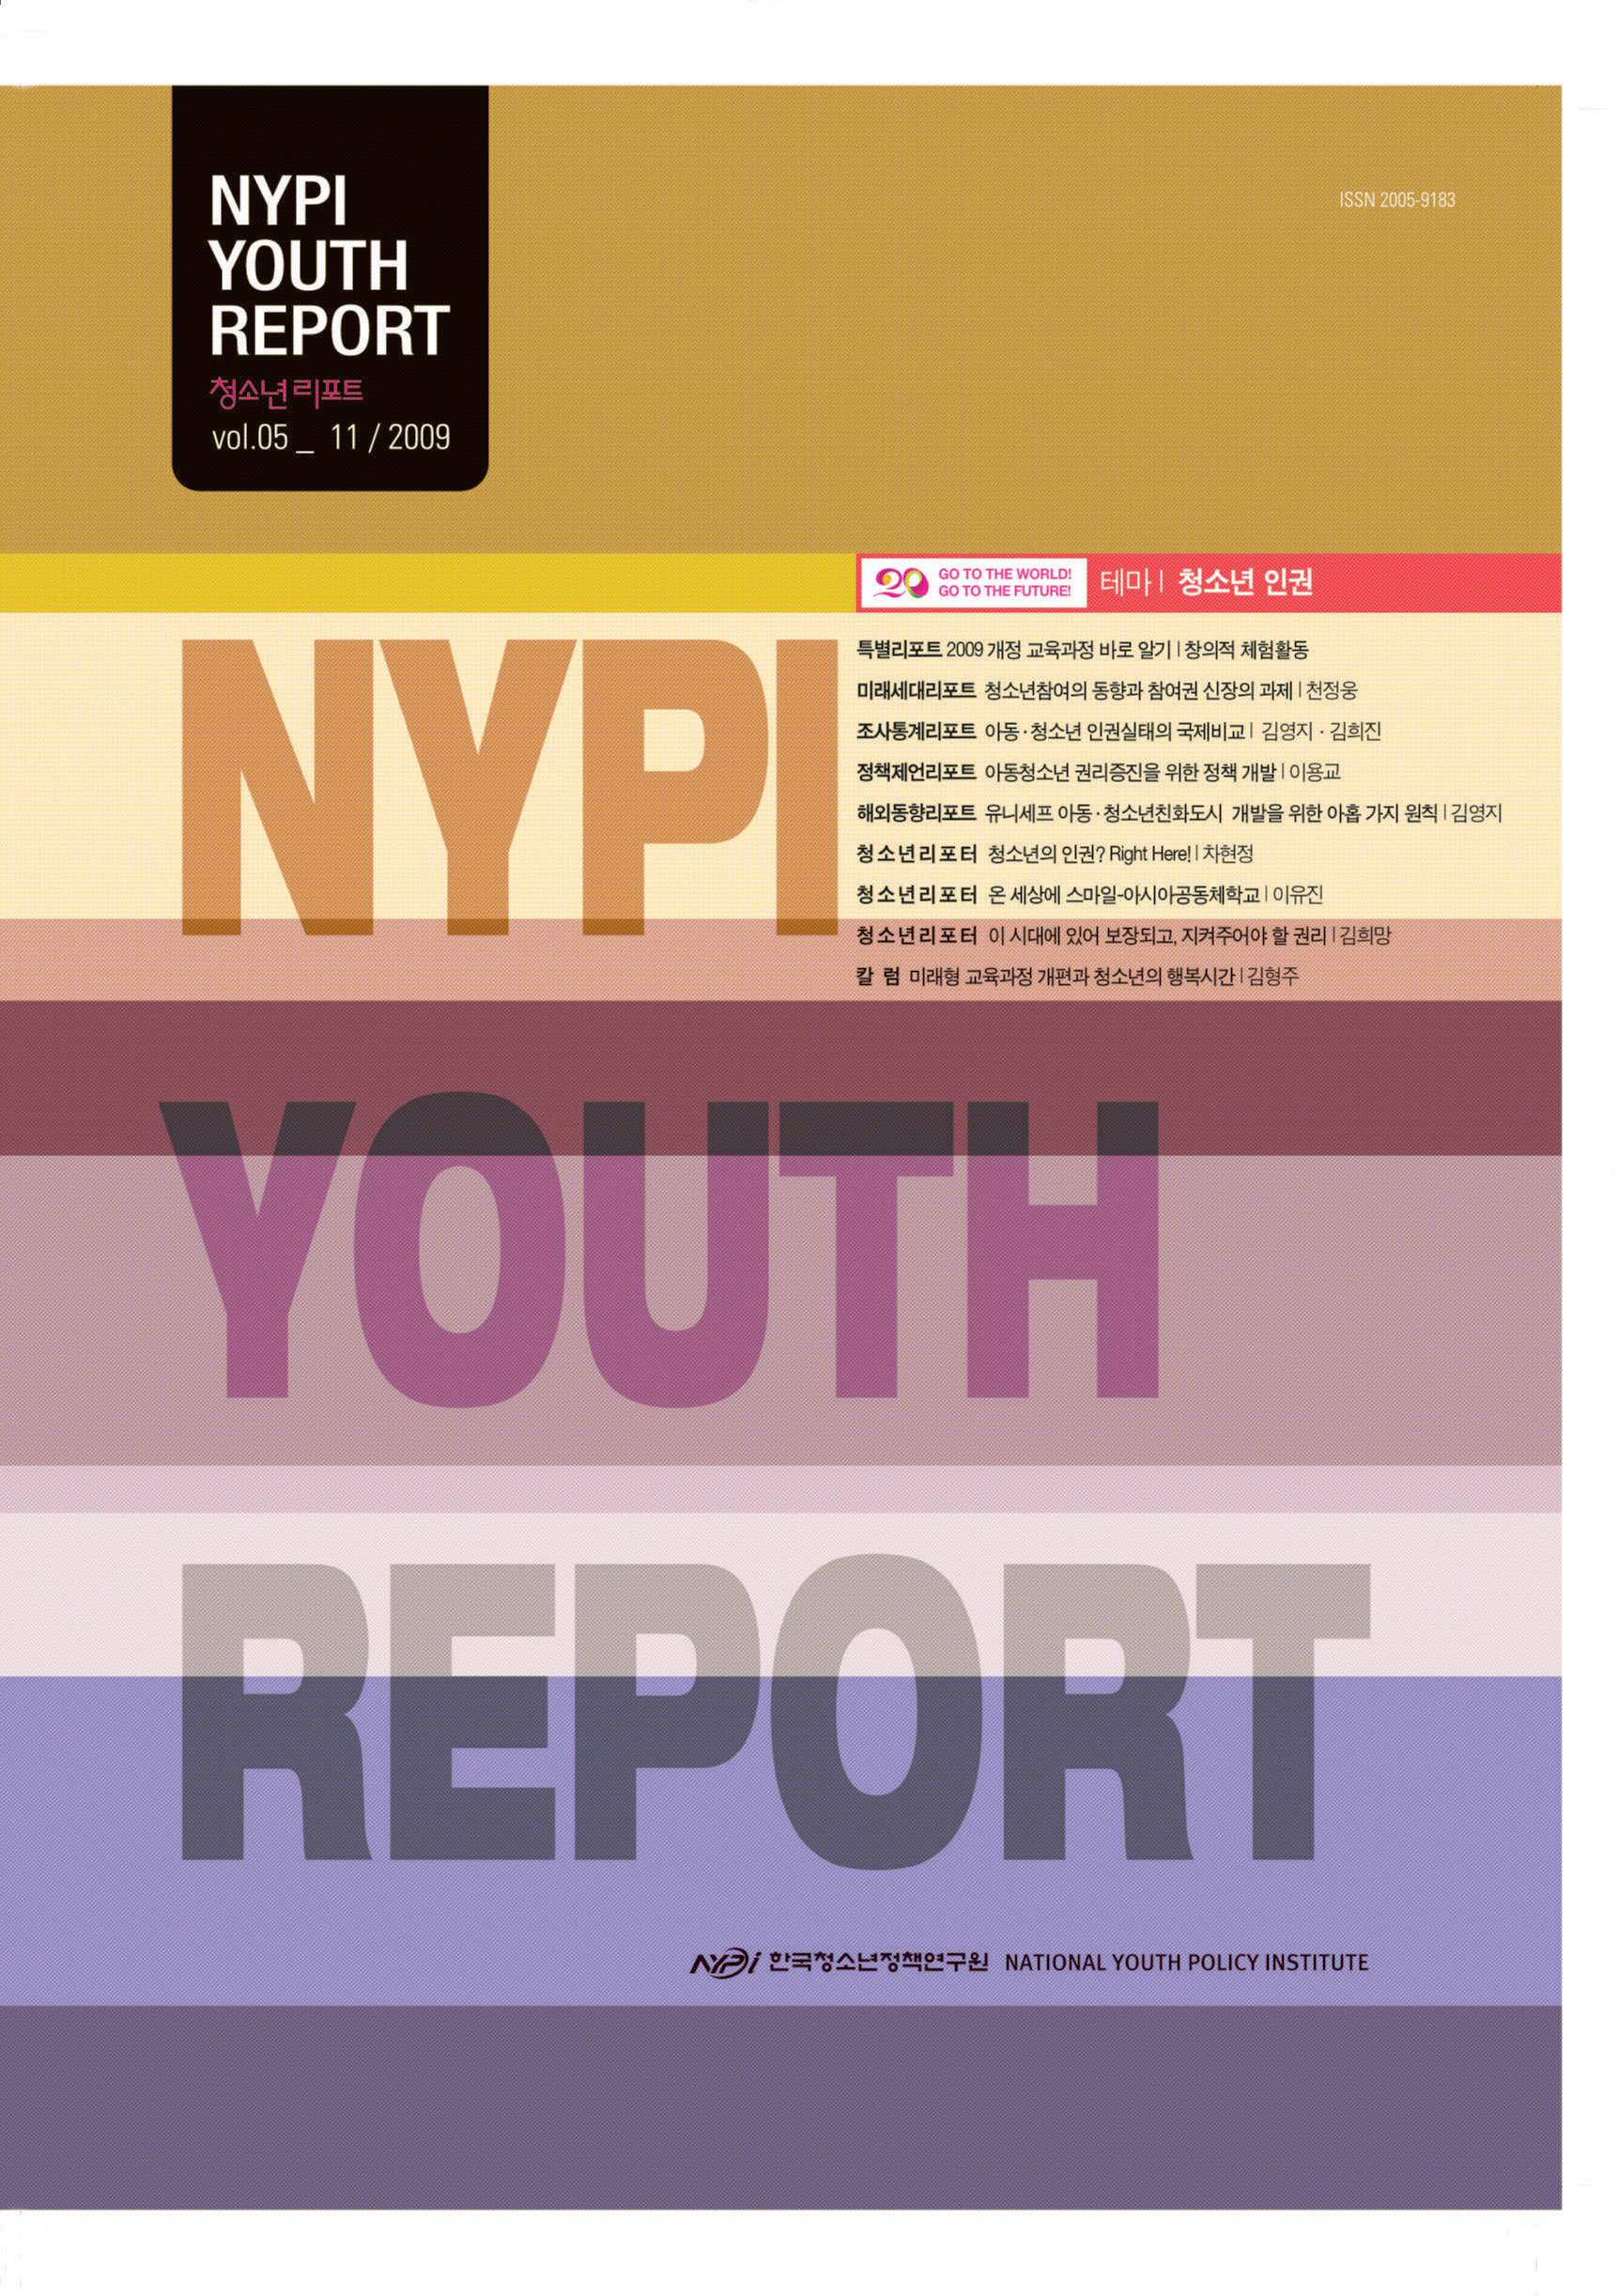 NYPI YOUTH REPORT (vol.05_11/2009)